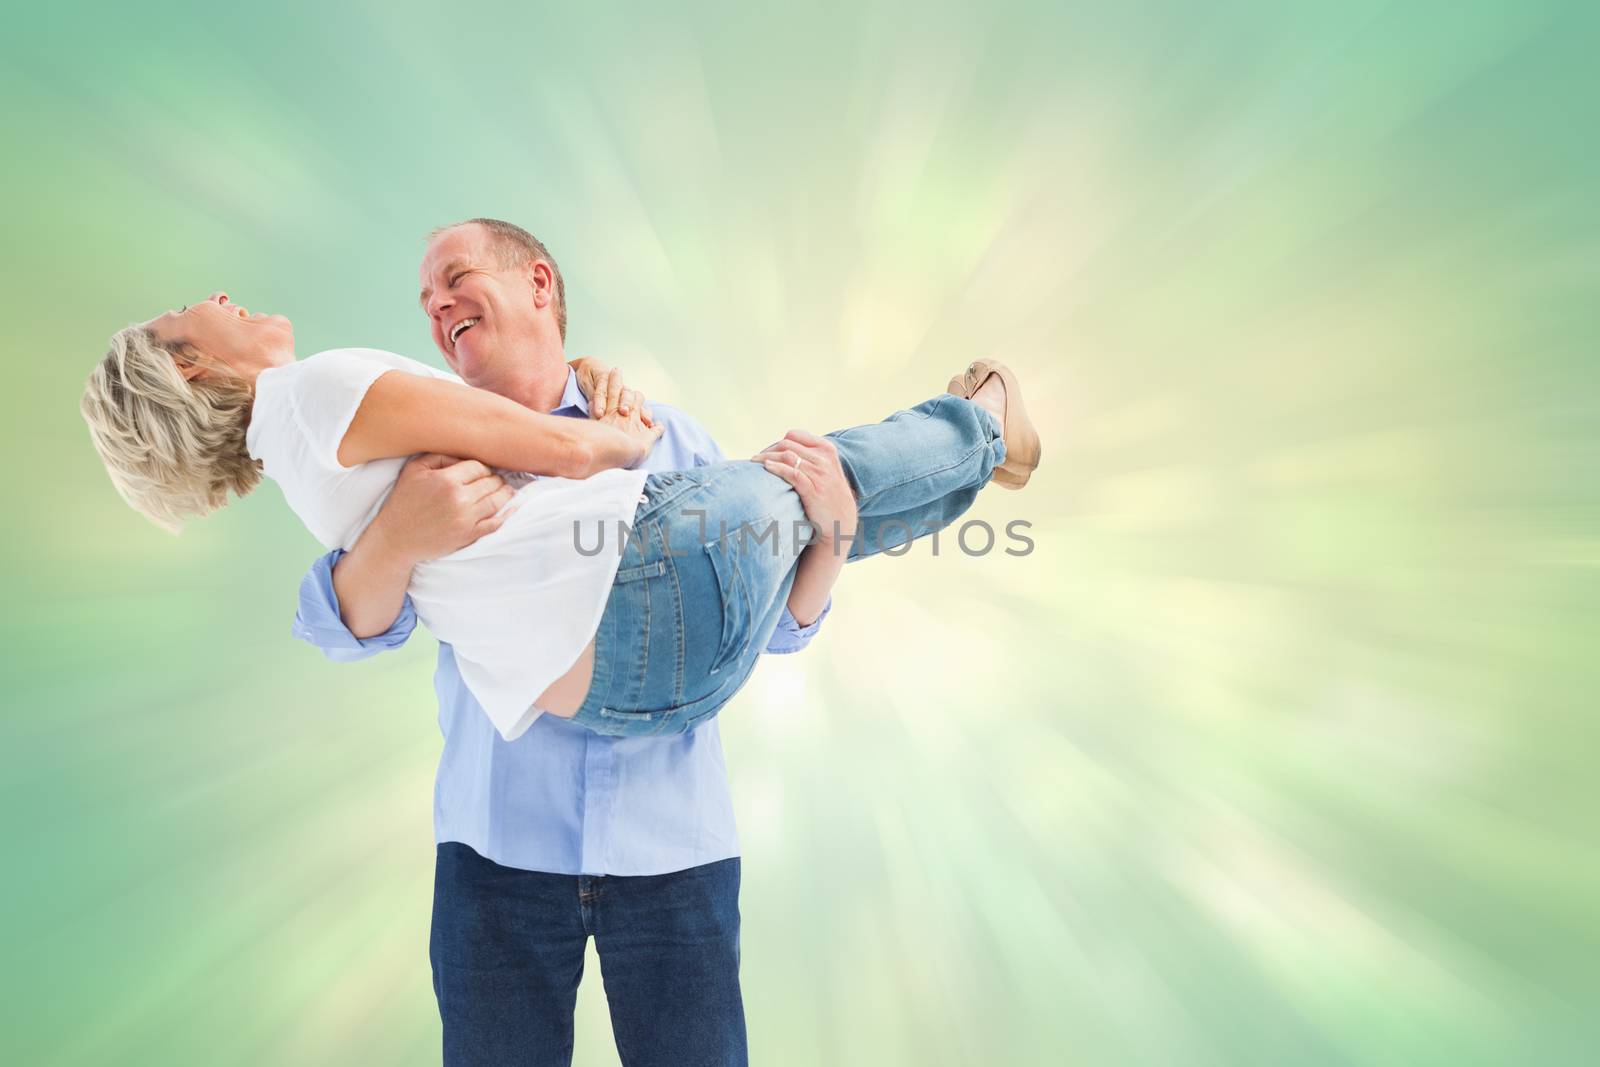 Mature man carrying his laughing partner against green abstract light spot design